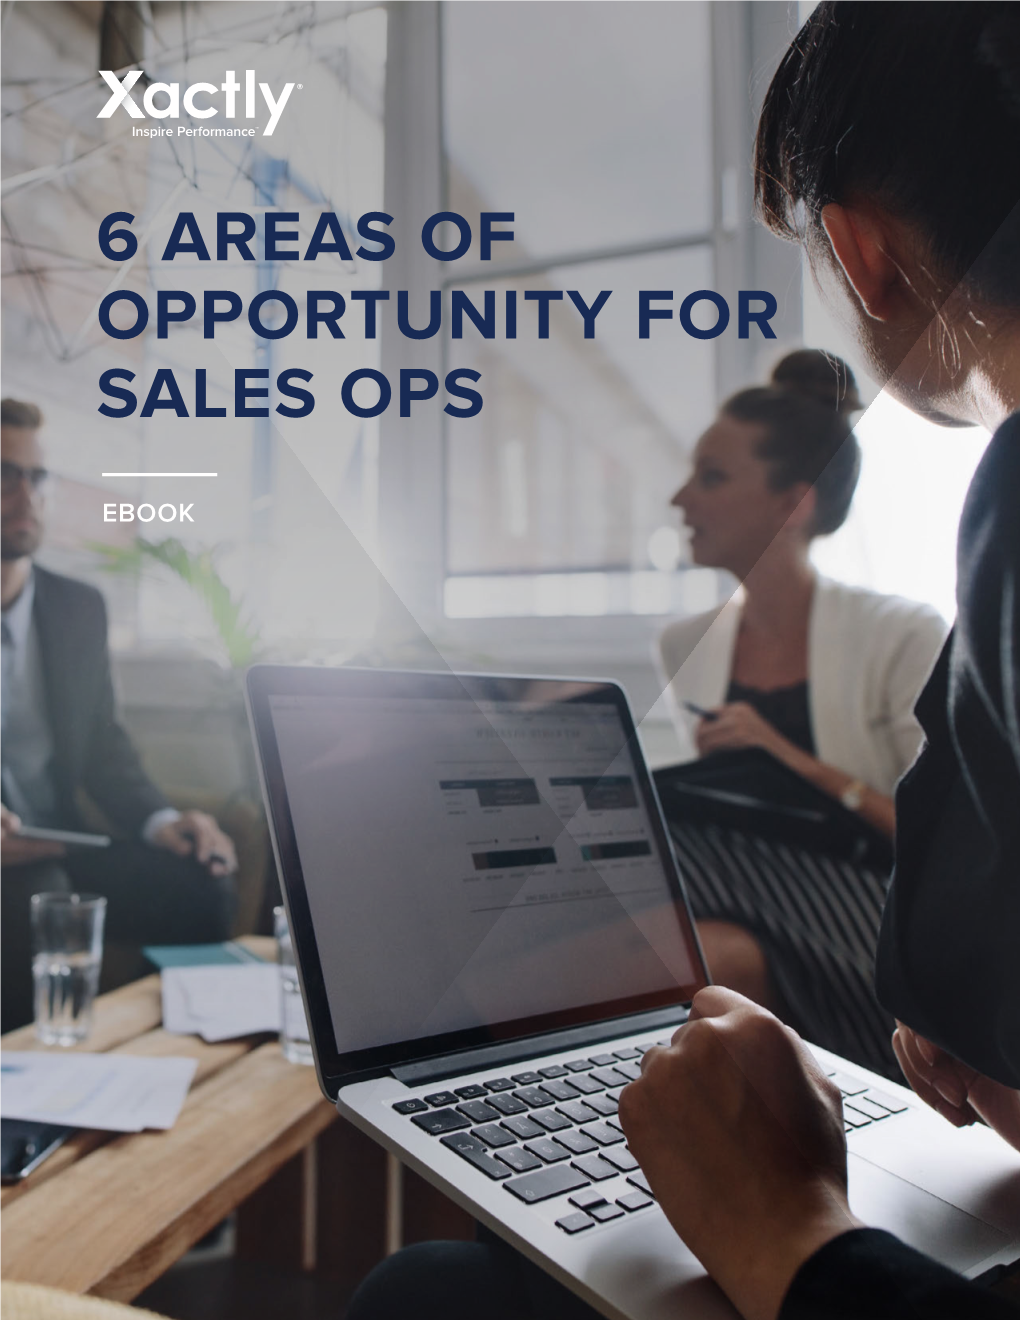 6 Areas of Opportunity for Sales Ops